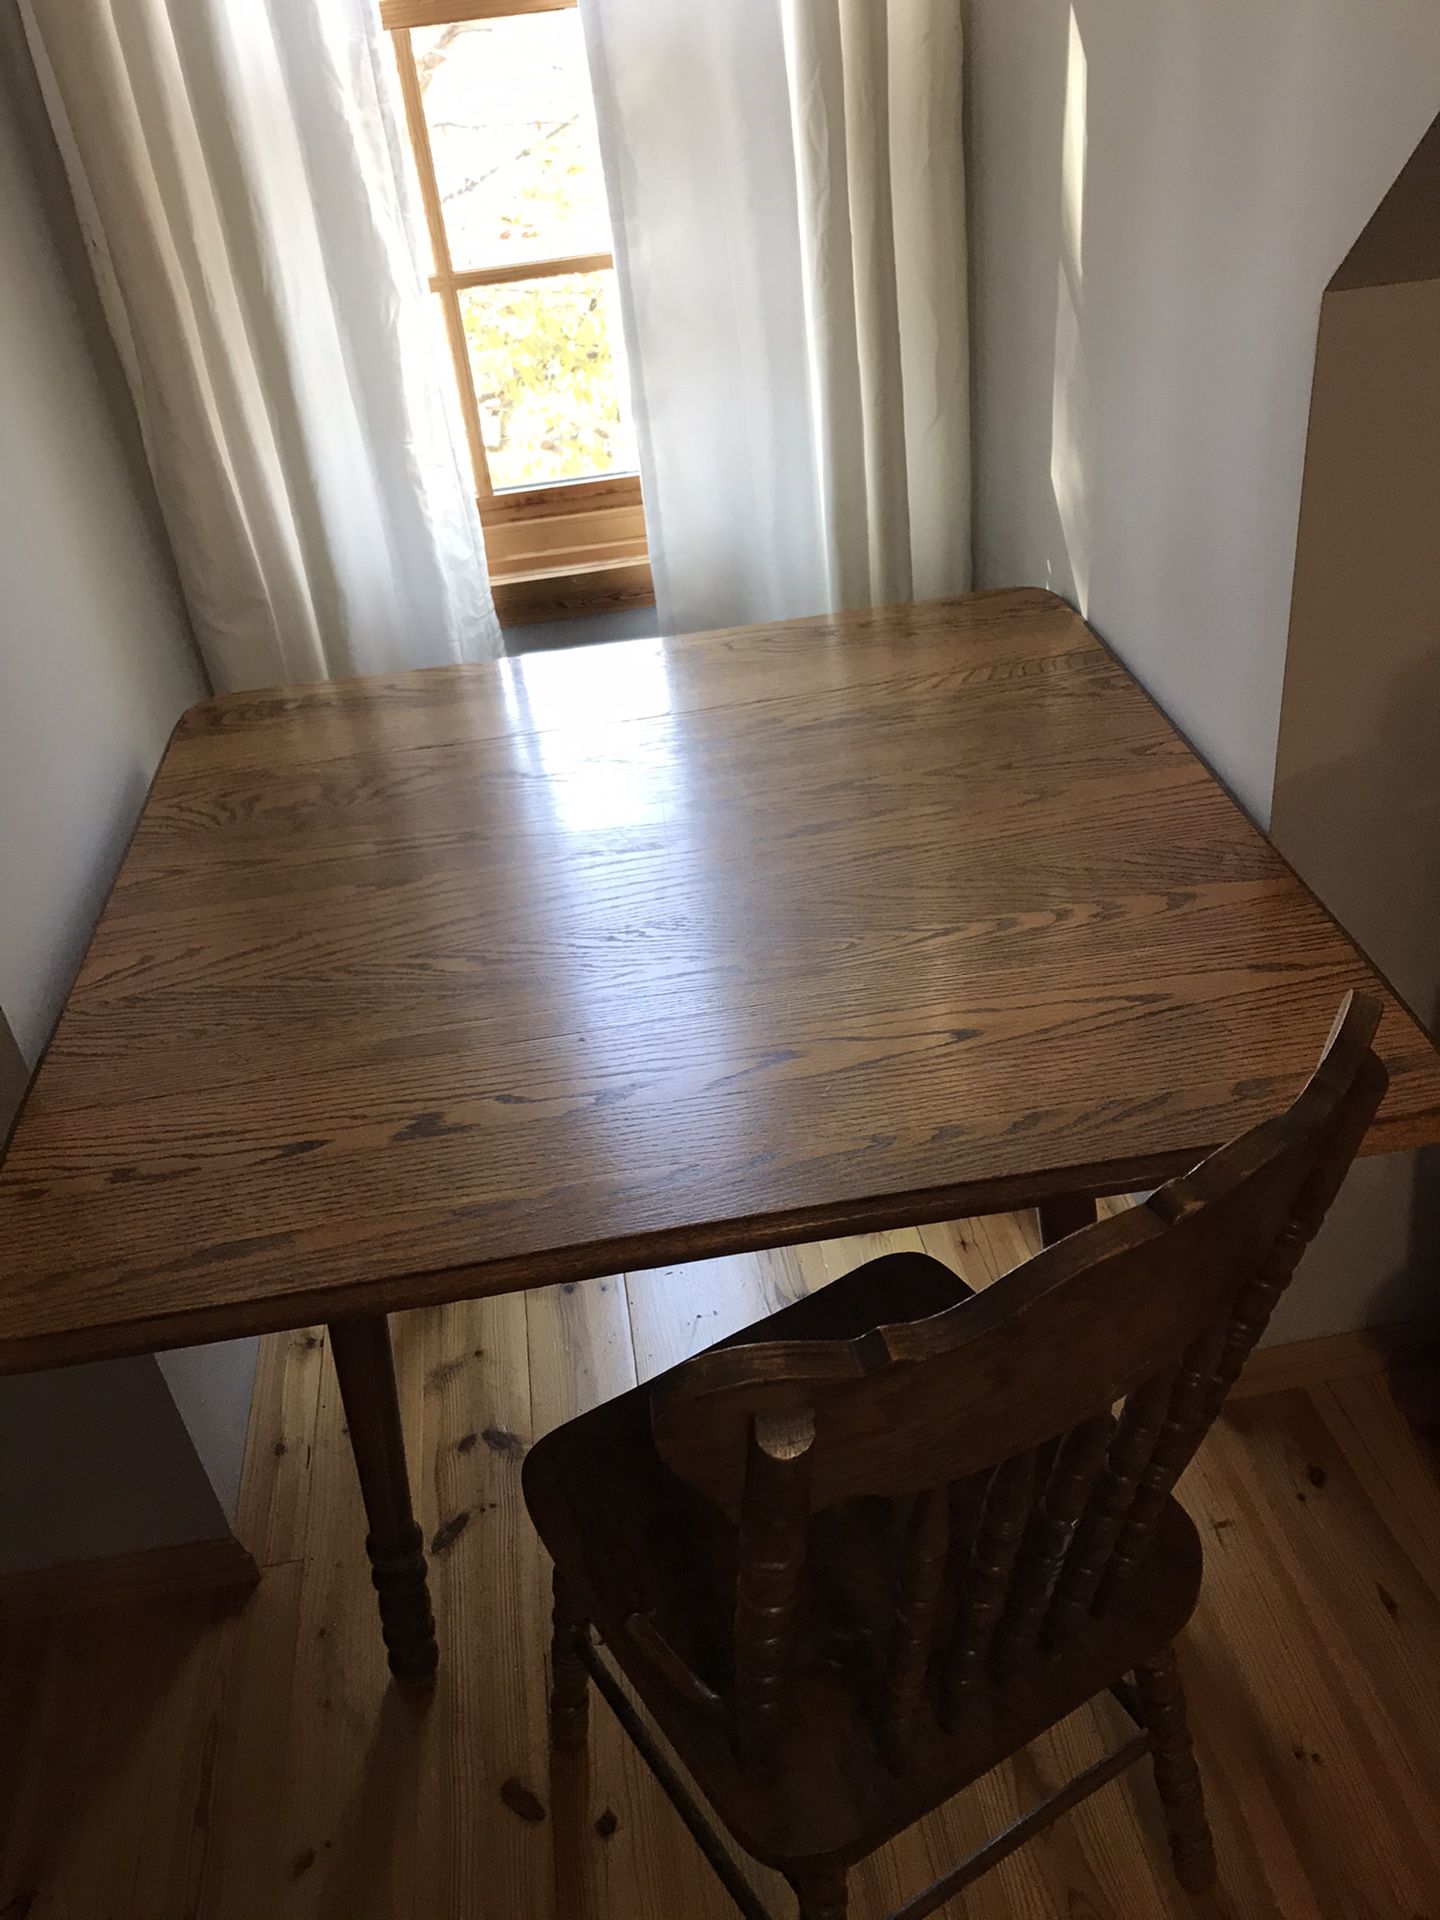 Drop leaf, Solid oak kitchen table with 2 chairs